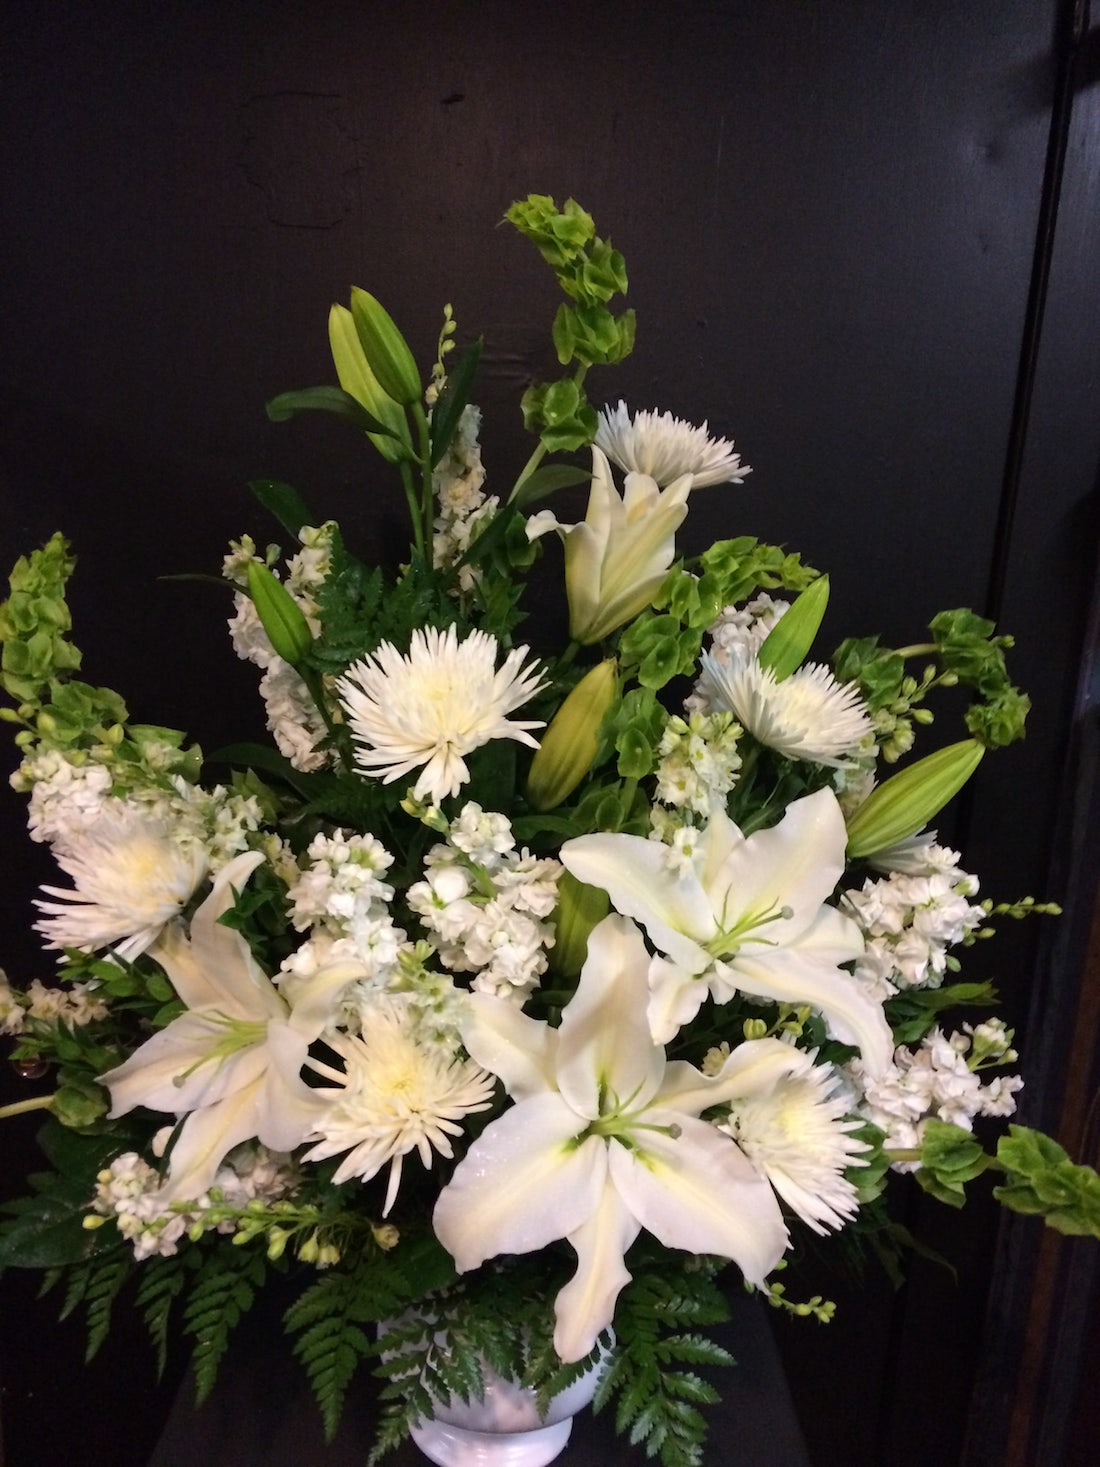 All White Flowers In An Urn